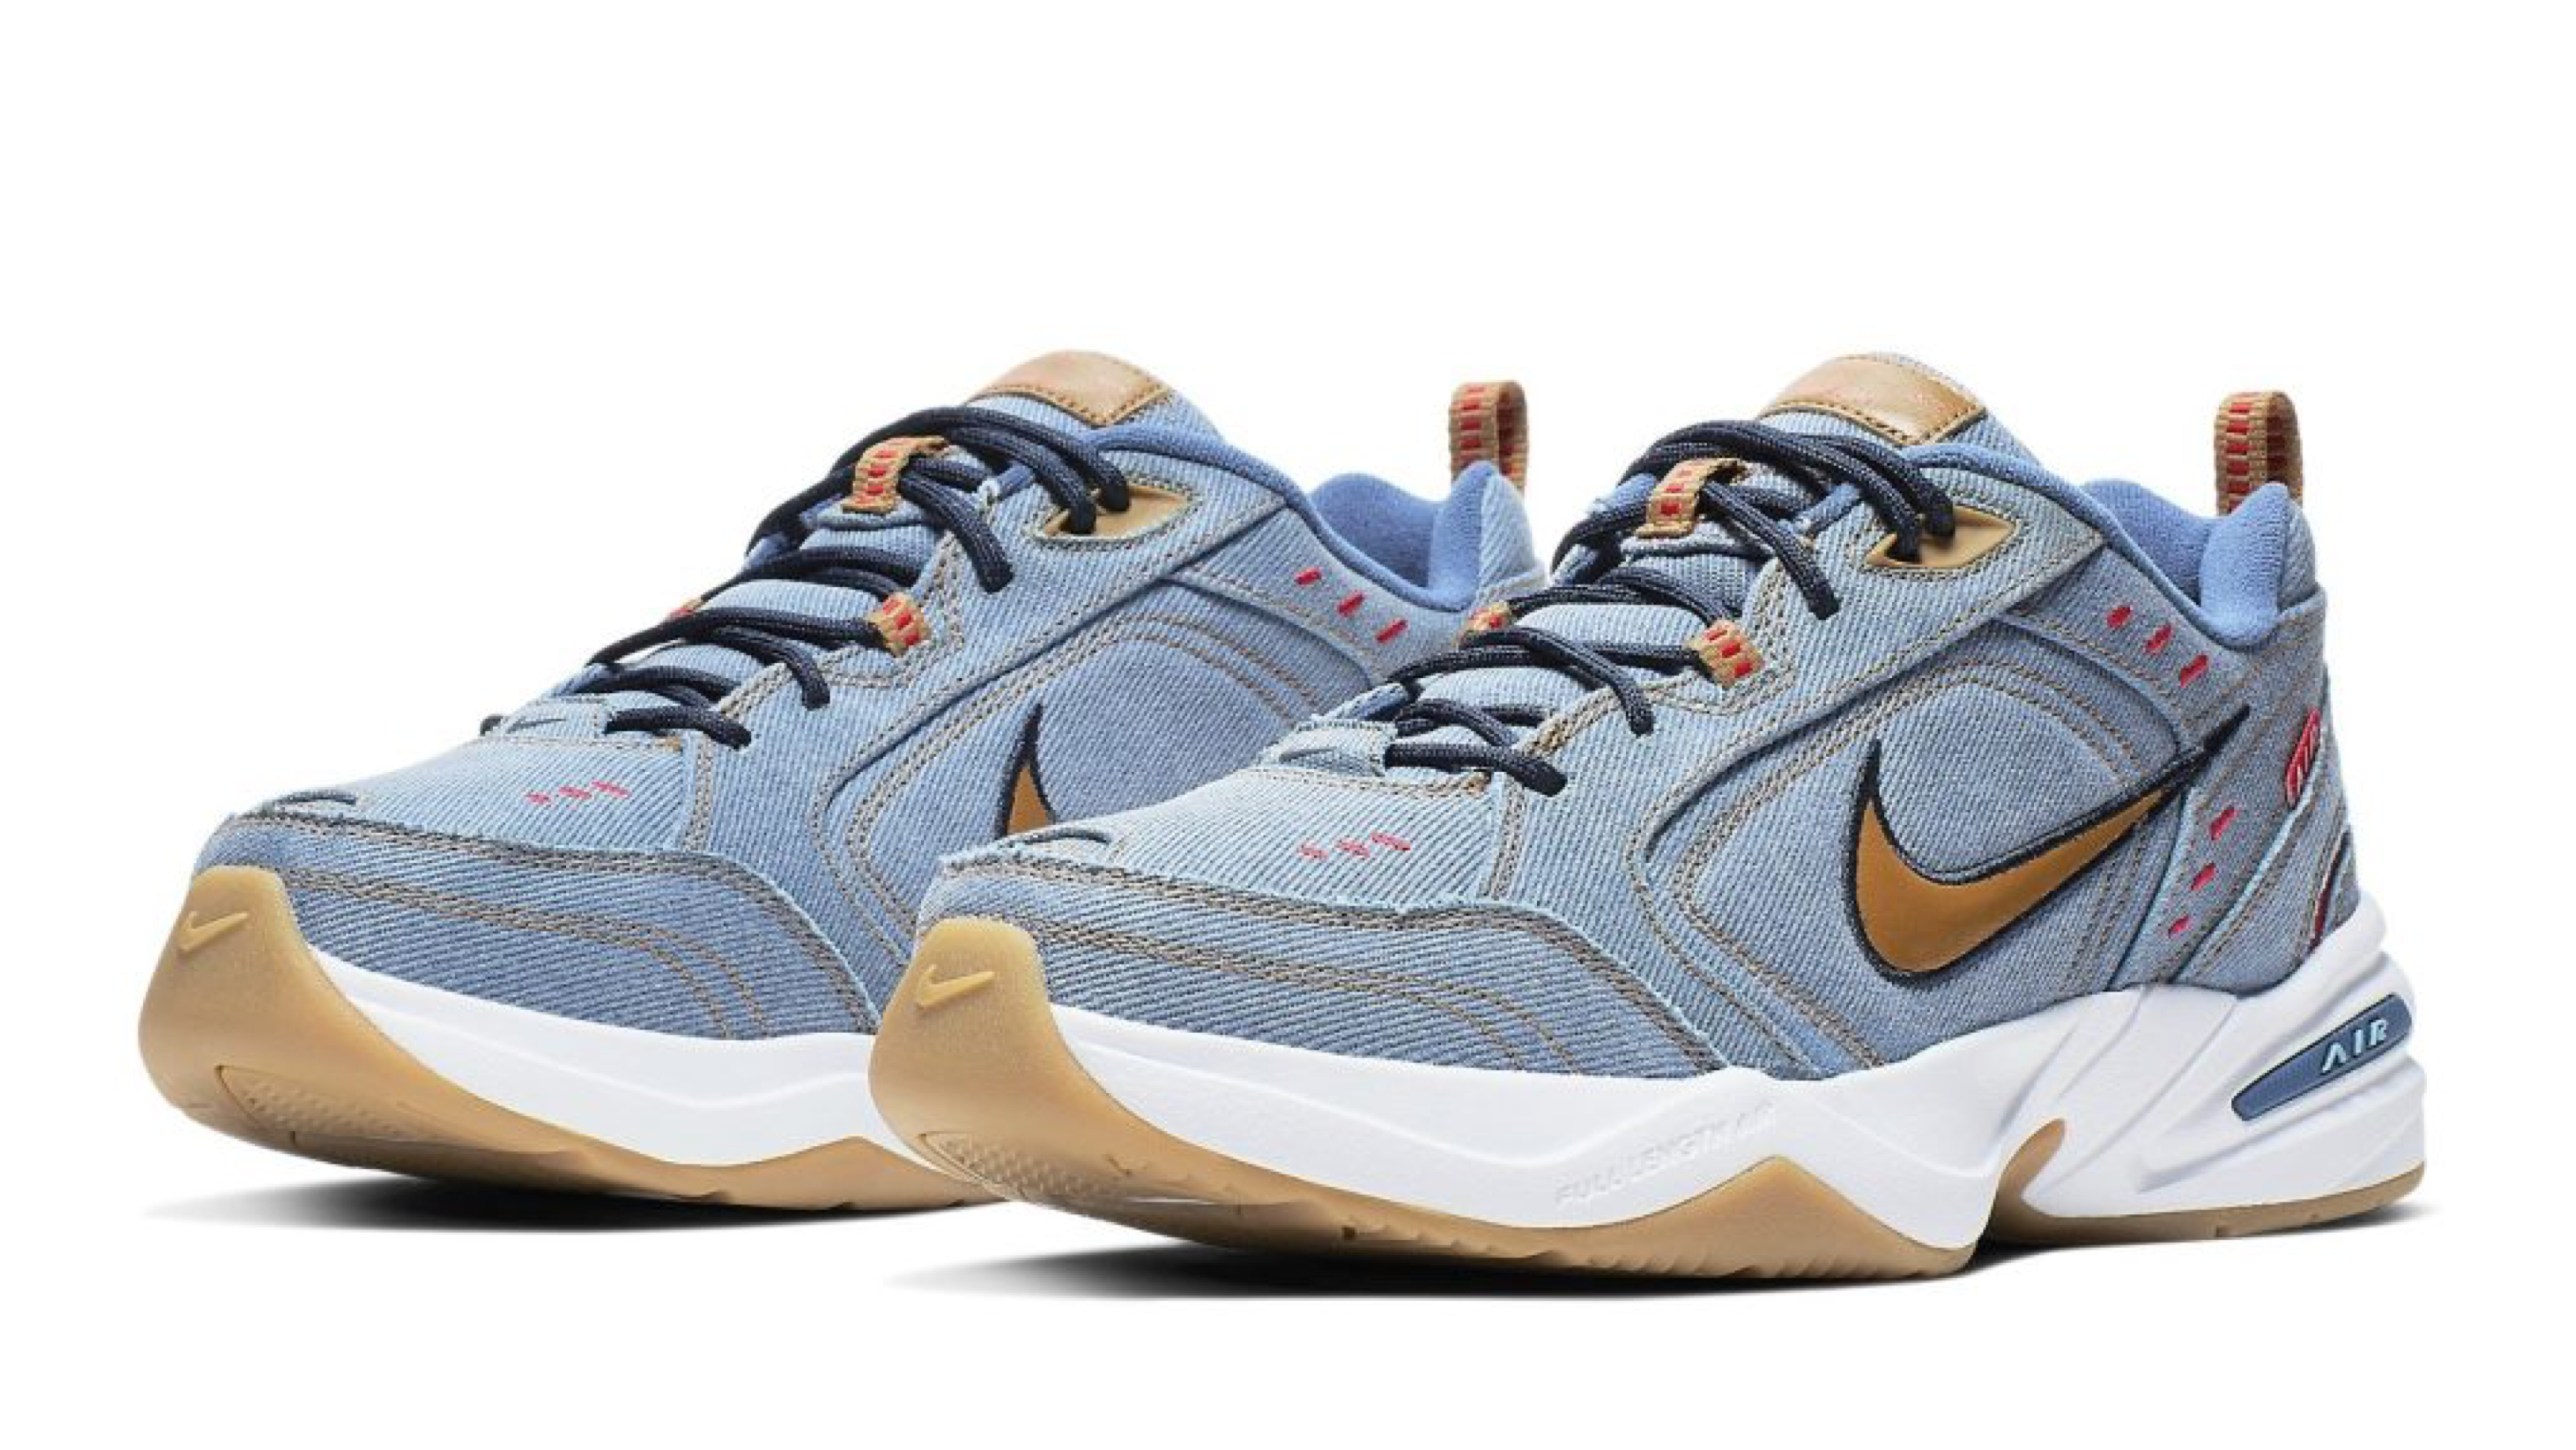 Nike's Special Edition Dad Shoe Will Perfectly Compliment Your Jorts